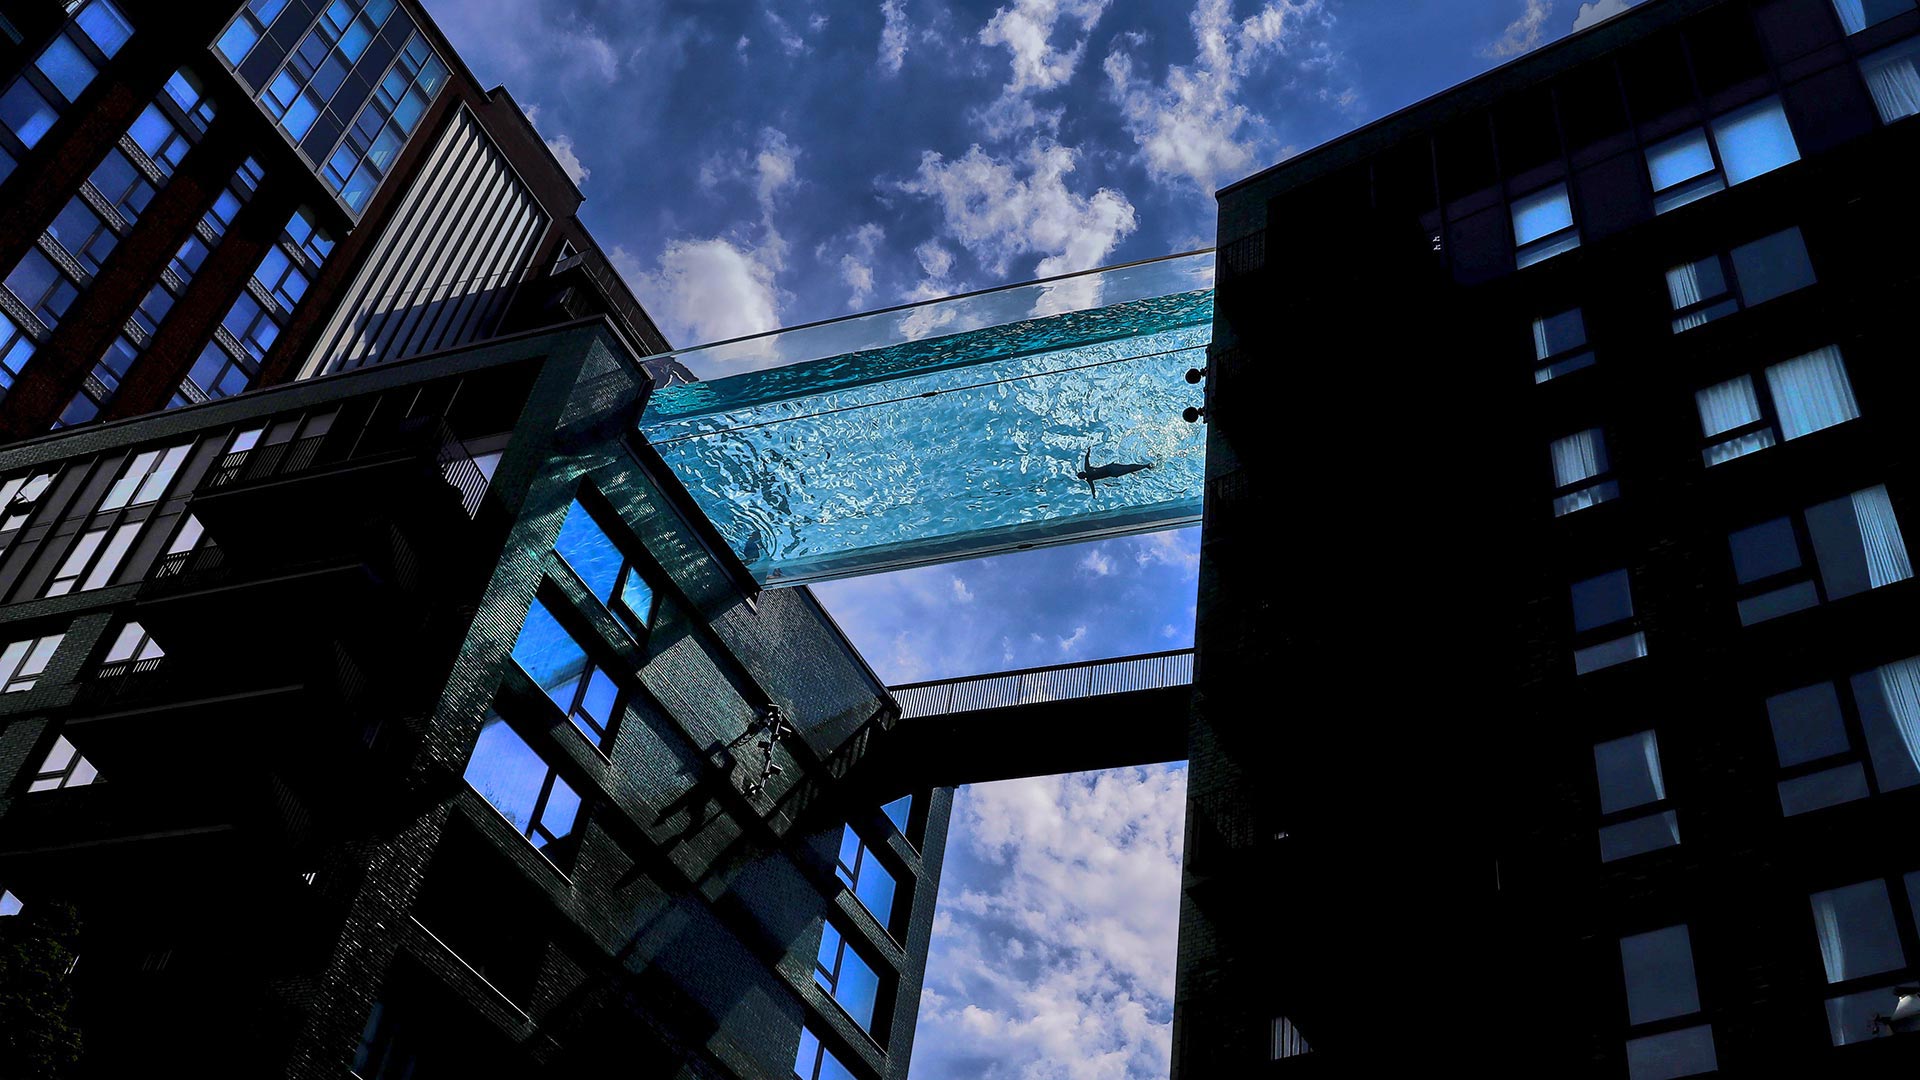 The Sky Pool at Embassy Gardens in London, England - Xinhua News Agency/Getty Images)